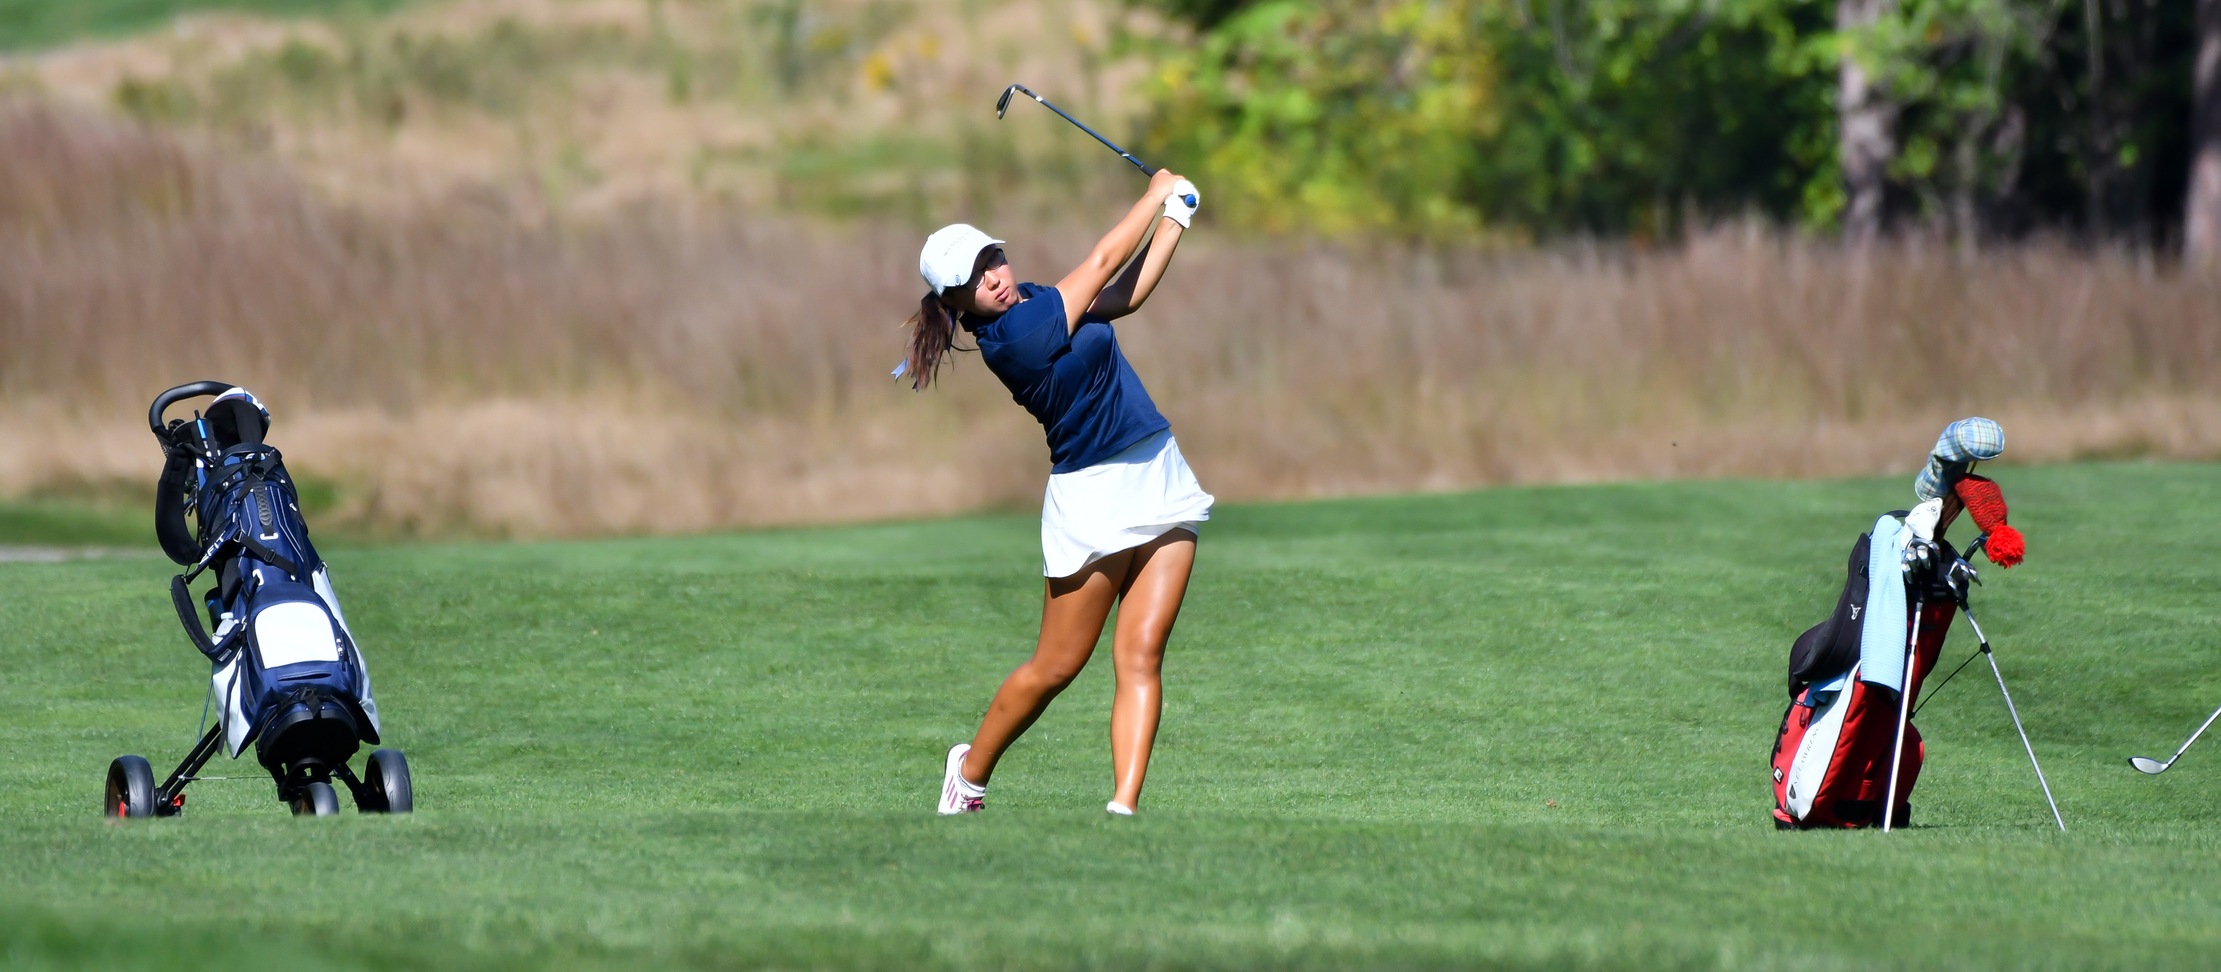 Golf Finishes Seventh Overall at Middlebury's George Phinney Jr. Classic